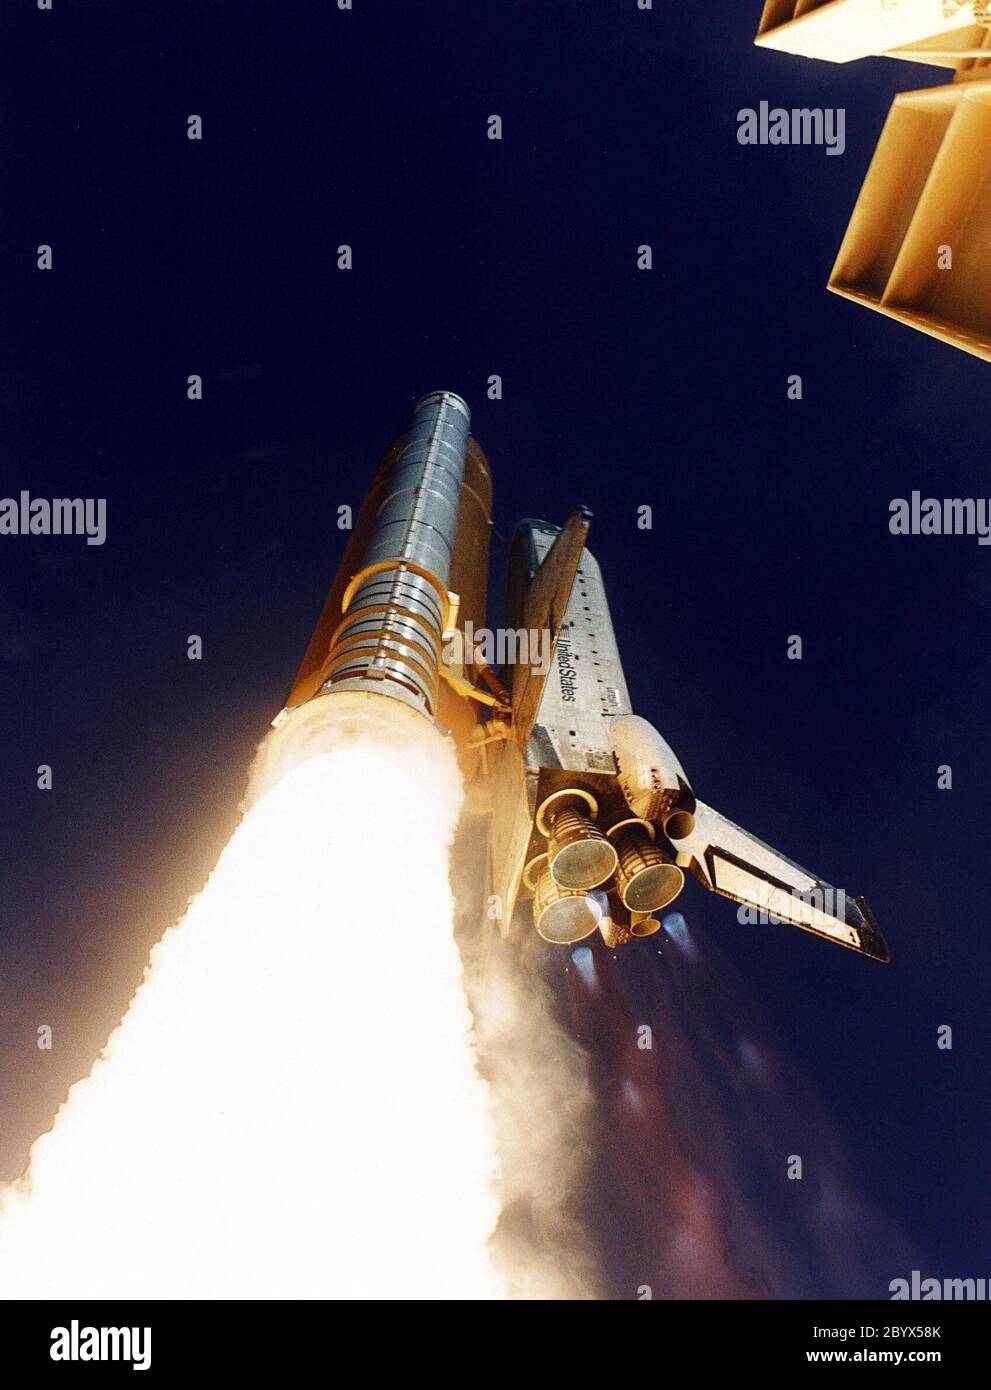 Like a rising sun lighting up the afternoon sky, the Space Shuttle Columbia soars from Launch Pad 39A at 2:20:32 p.m. EST, April 4, on the 16-day Microgravity Science Laboratory-1 (MSL-1) mission. The crew members are Mission Commander James D. Halsell, Jr.; Pilot Susan L. Still; Payload Commander Janice Voss; Mission Specialists Michael L. Gernhardt and Donald A. Thomas; and Payload Specialists Roger K. Crouch and Gregory T. Linteris. During the scheduled 16-day STS-83 mission, the MSL-1 will be used to test some of the hardware, facilities and procedures that are planned for use on the Inter Stock Photo